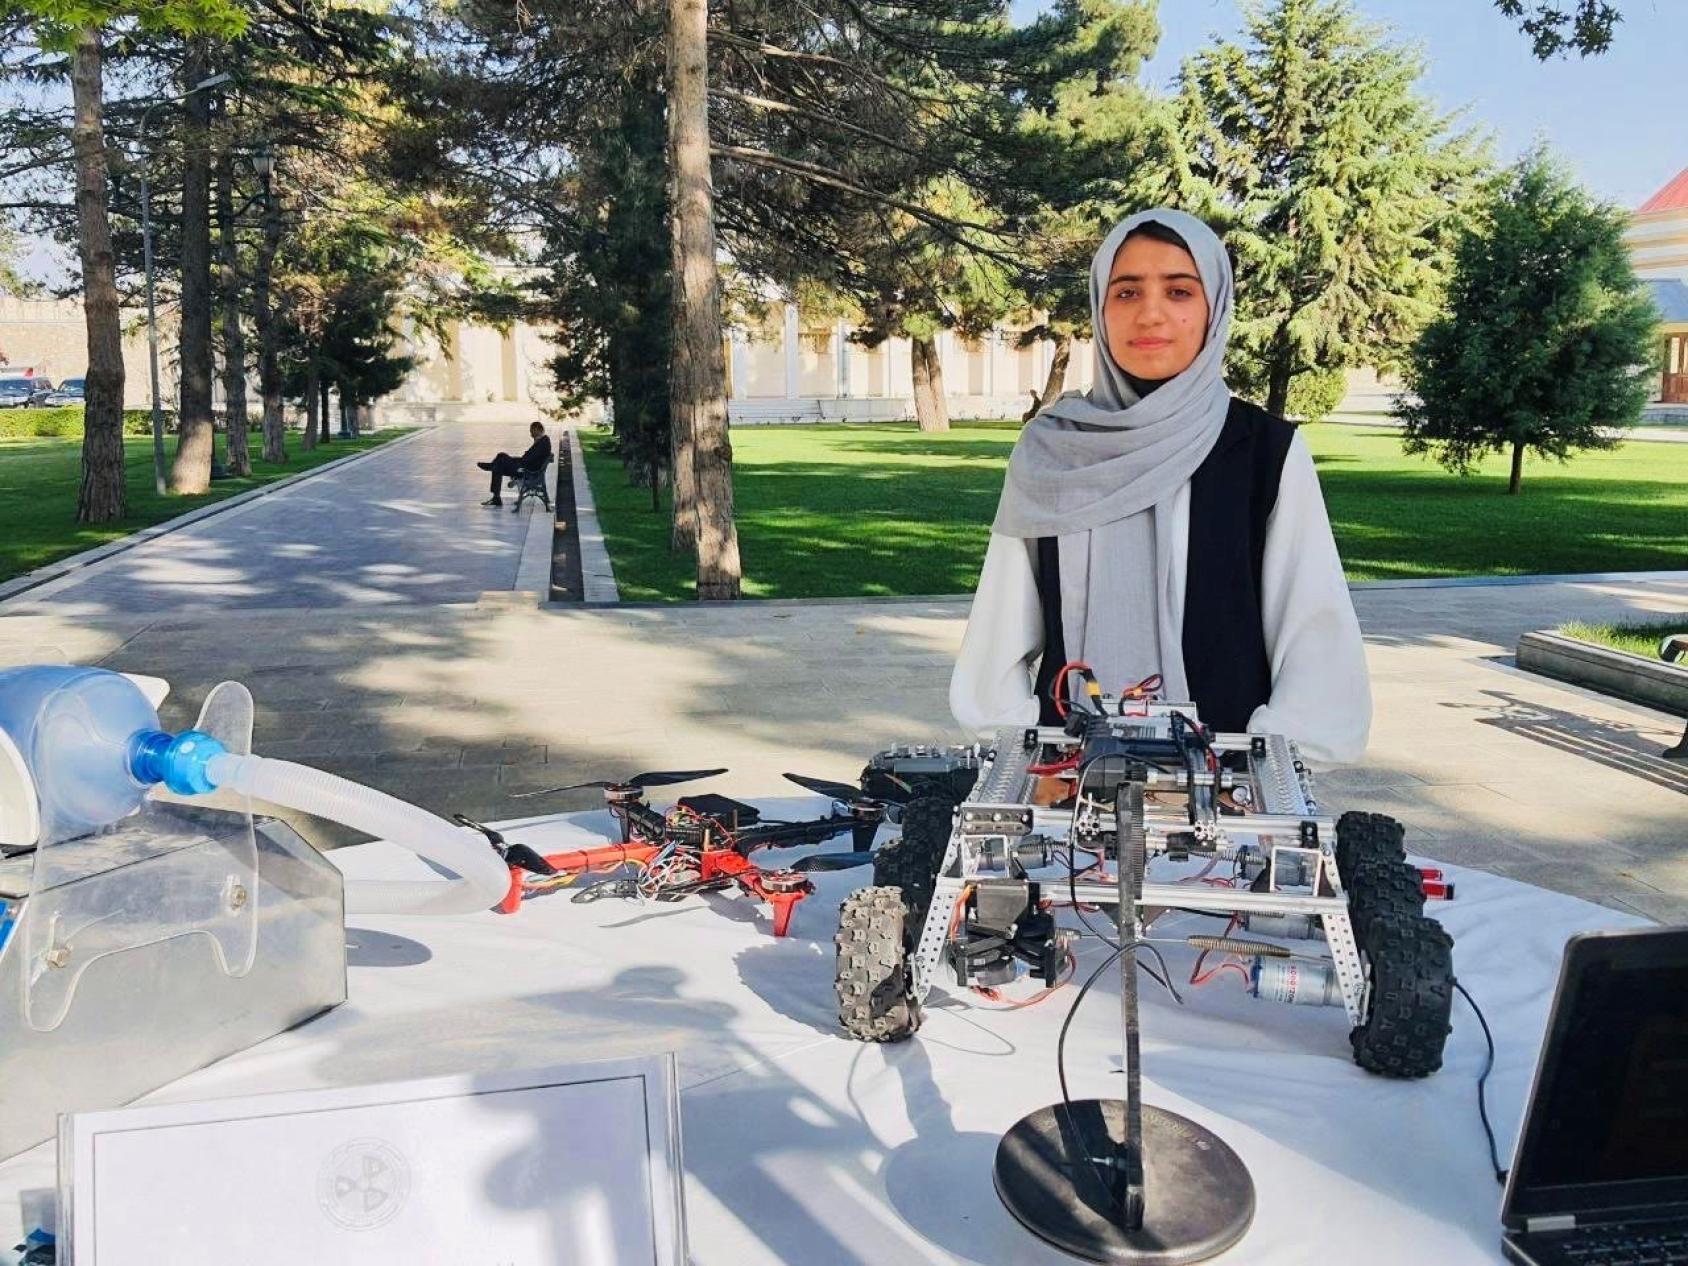 A girl in a black dress and grey headscarf stands in front of a table where a robot model is assembled